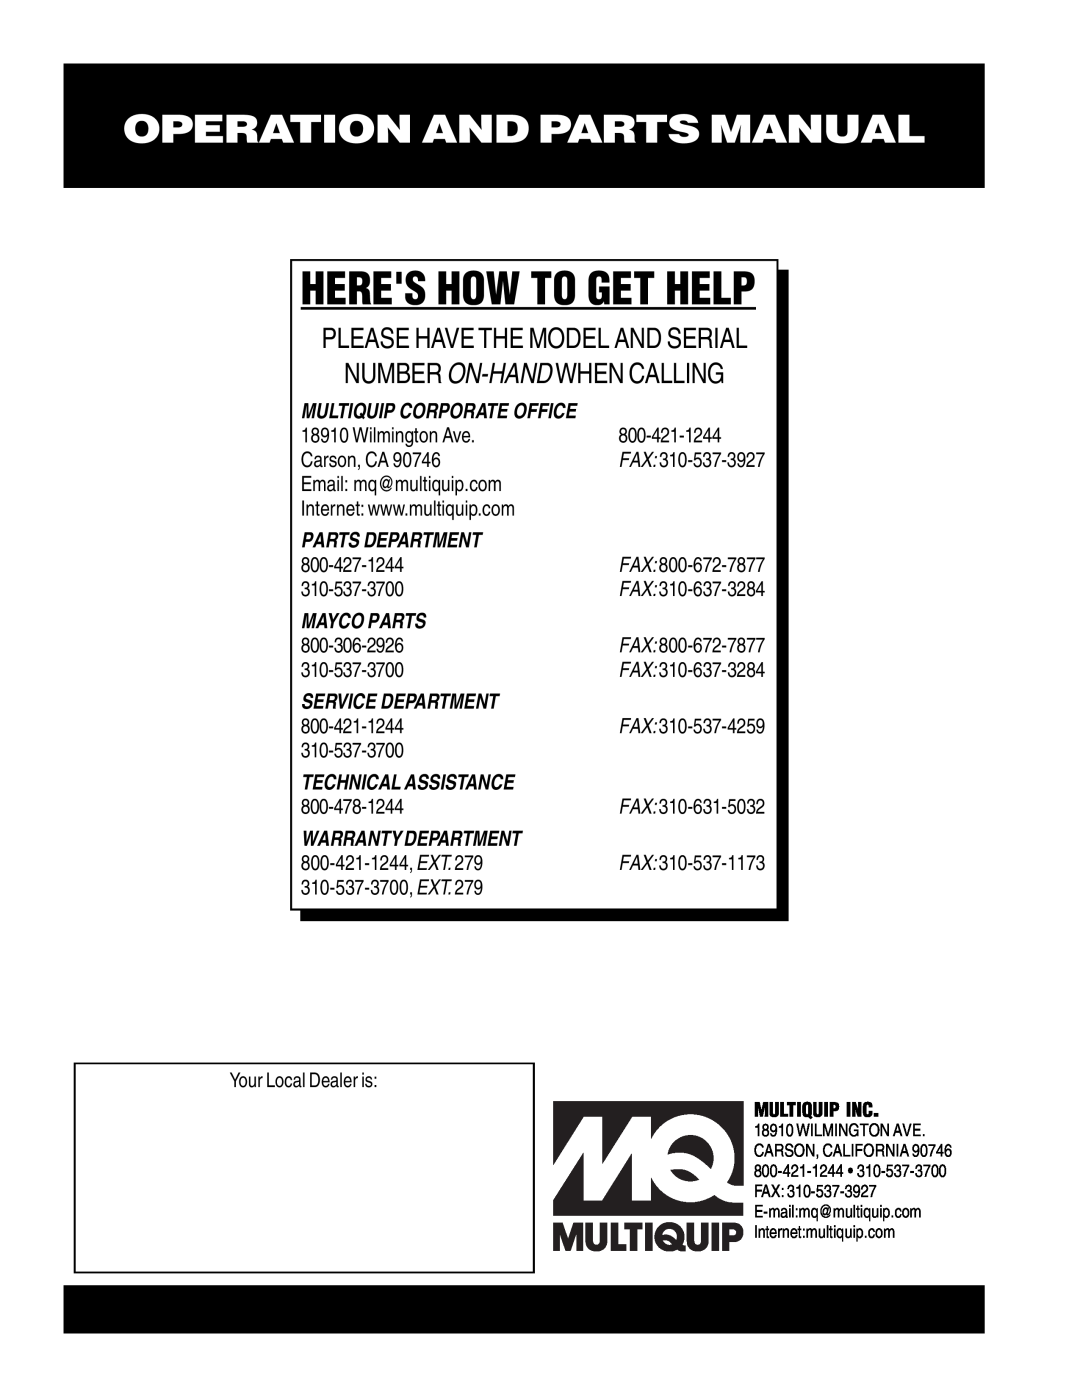 Multiquip ST-2005 Heres How To Get Help, Operation And Parts Manual, Parts Department, Mayco Parts, Service Department 